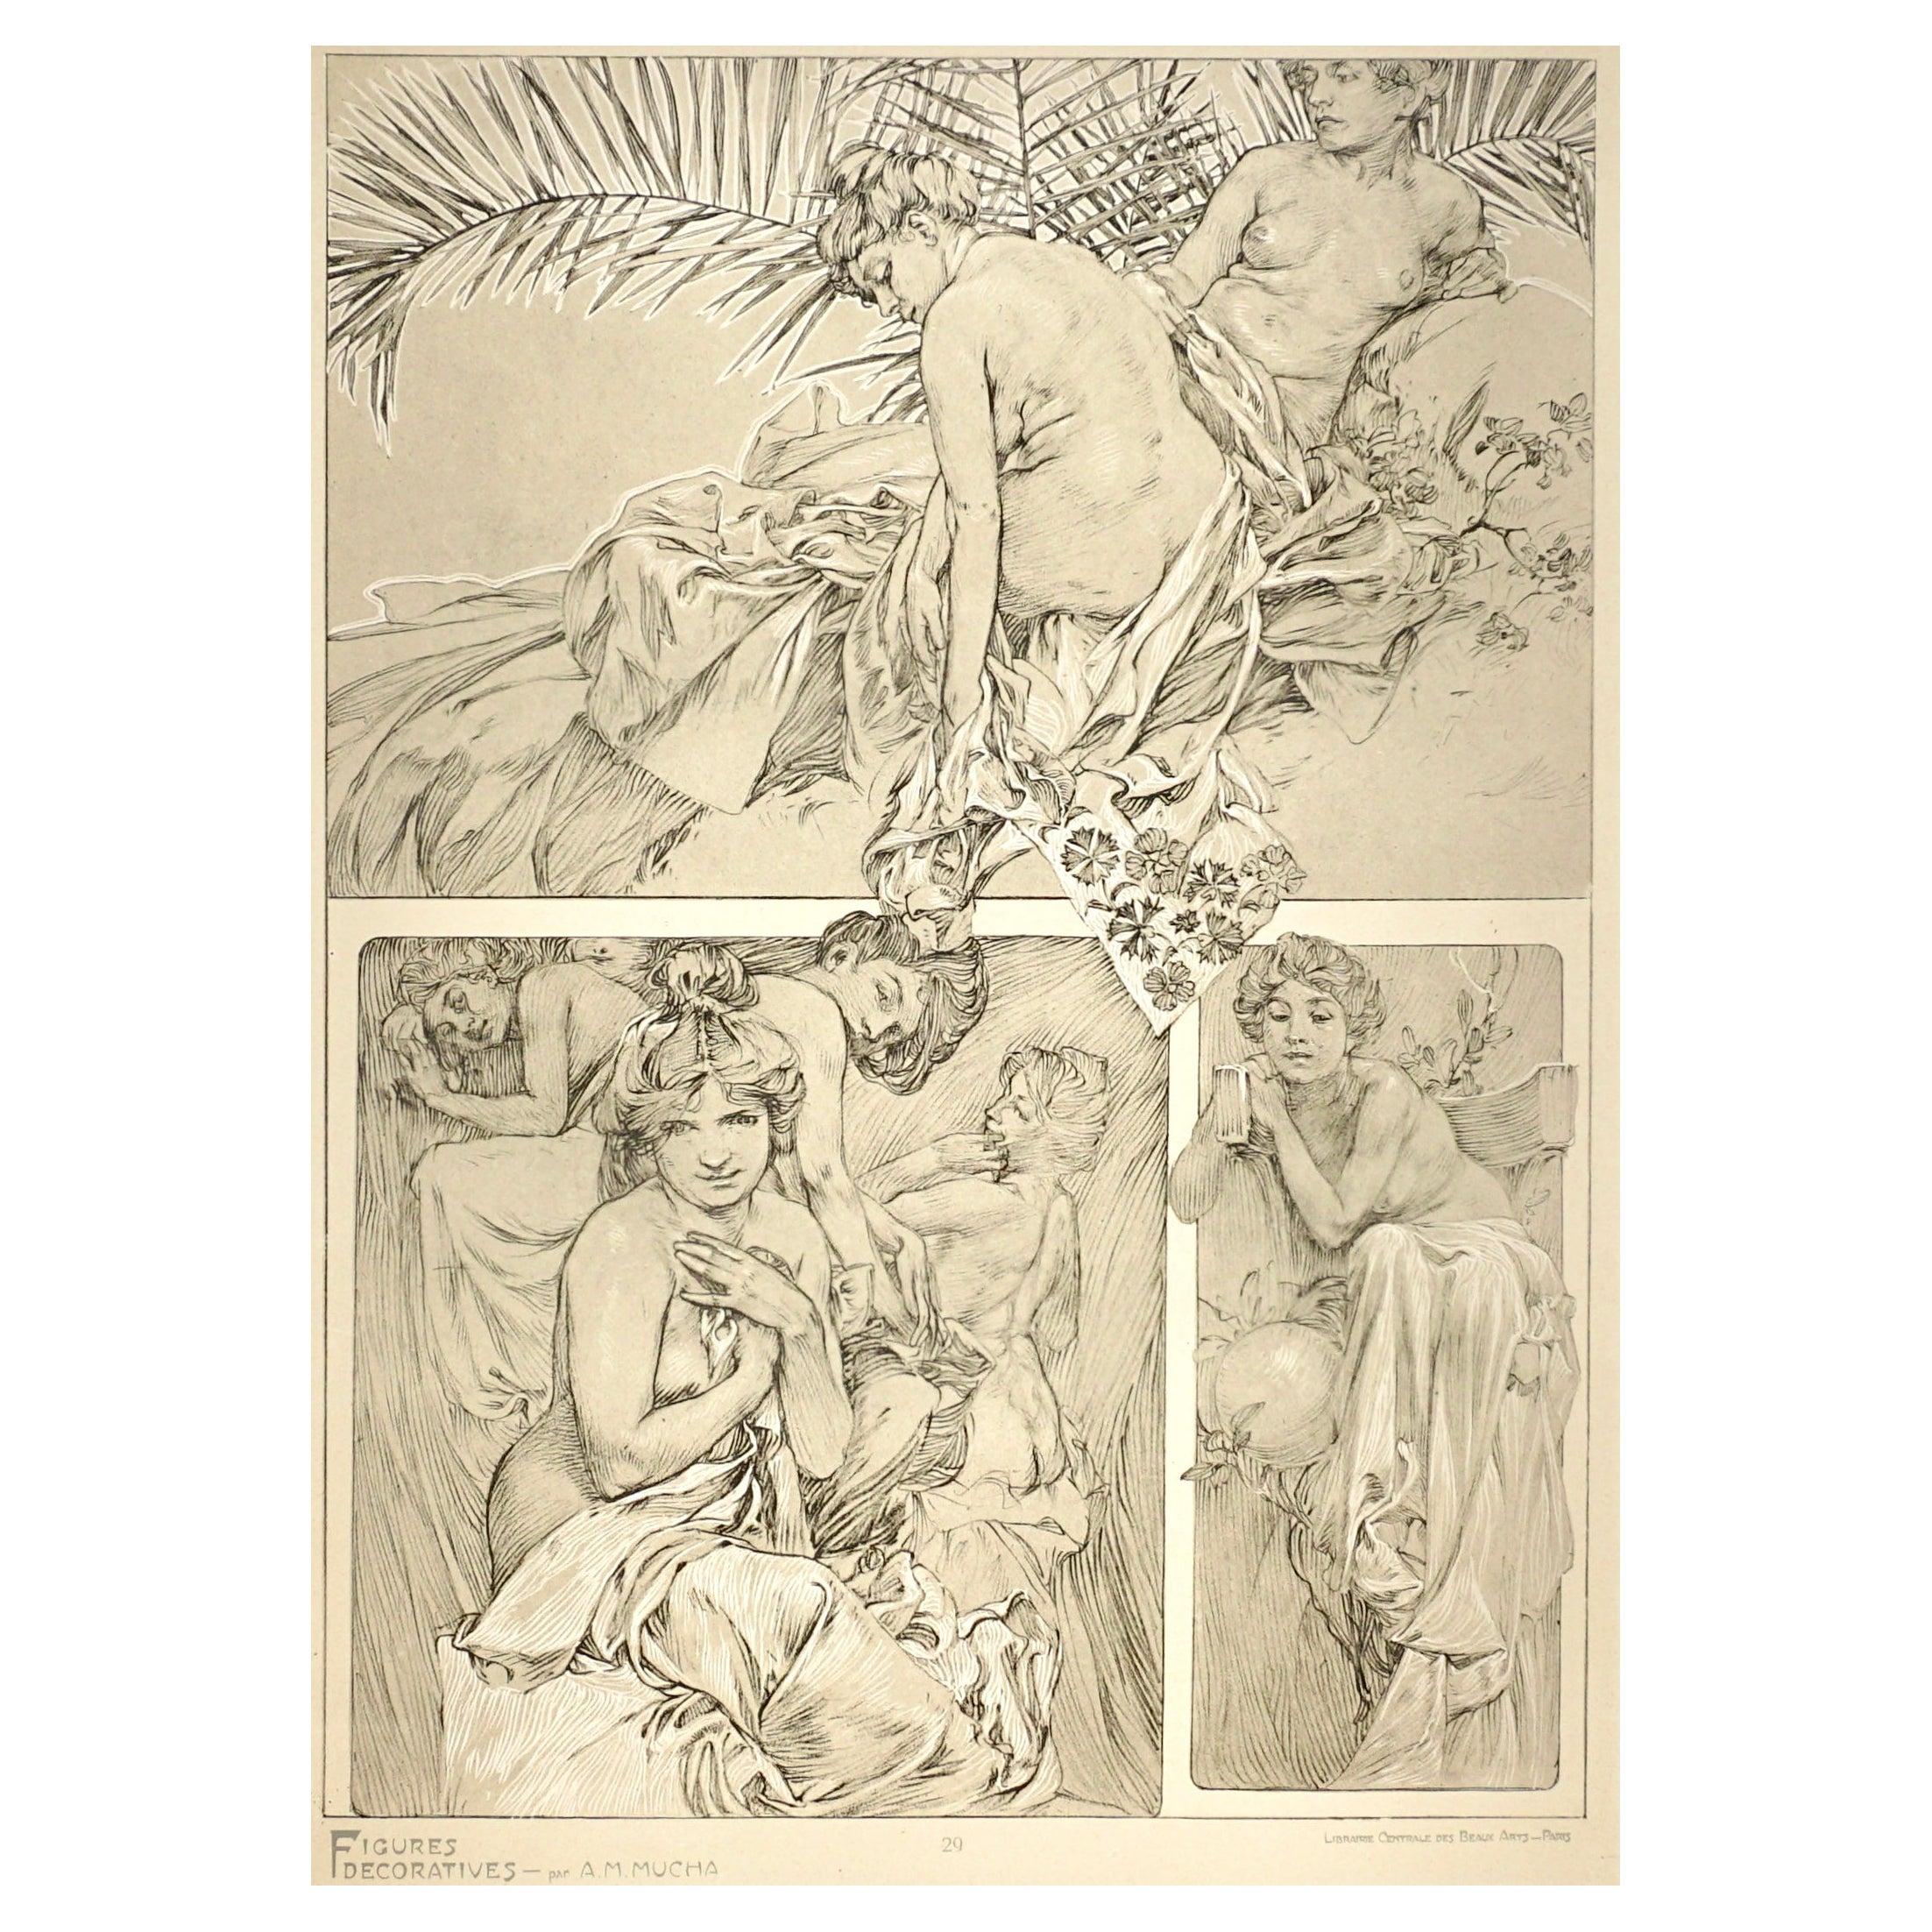 A framed Art Nouveau lithograph collotype poster by Alphone Mucha from 1905 representing the artist’s sketches of nudes, women and beautiful ladies in blacks and white pigments on vellum paper. Plate 29 of “Figures Decoratives par A. M. Mucha,”